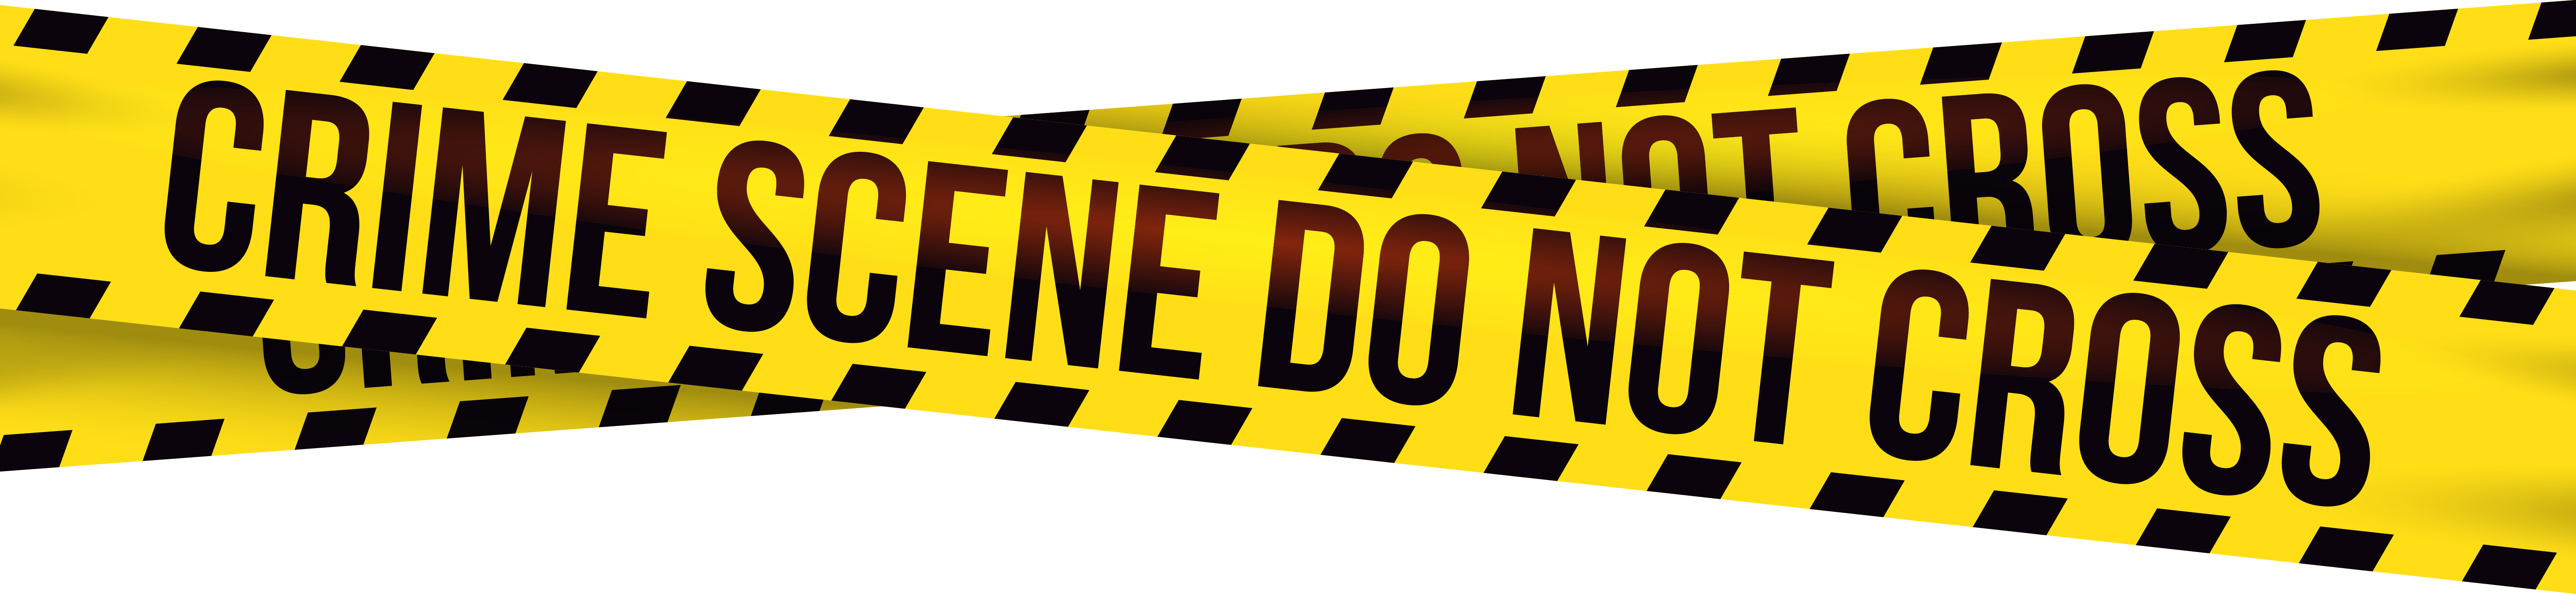 Police Tape PNG Image in Transparent - Caution Tape Png